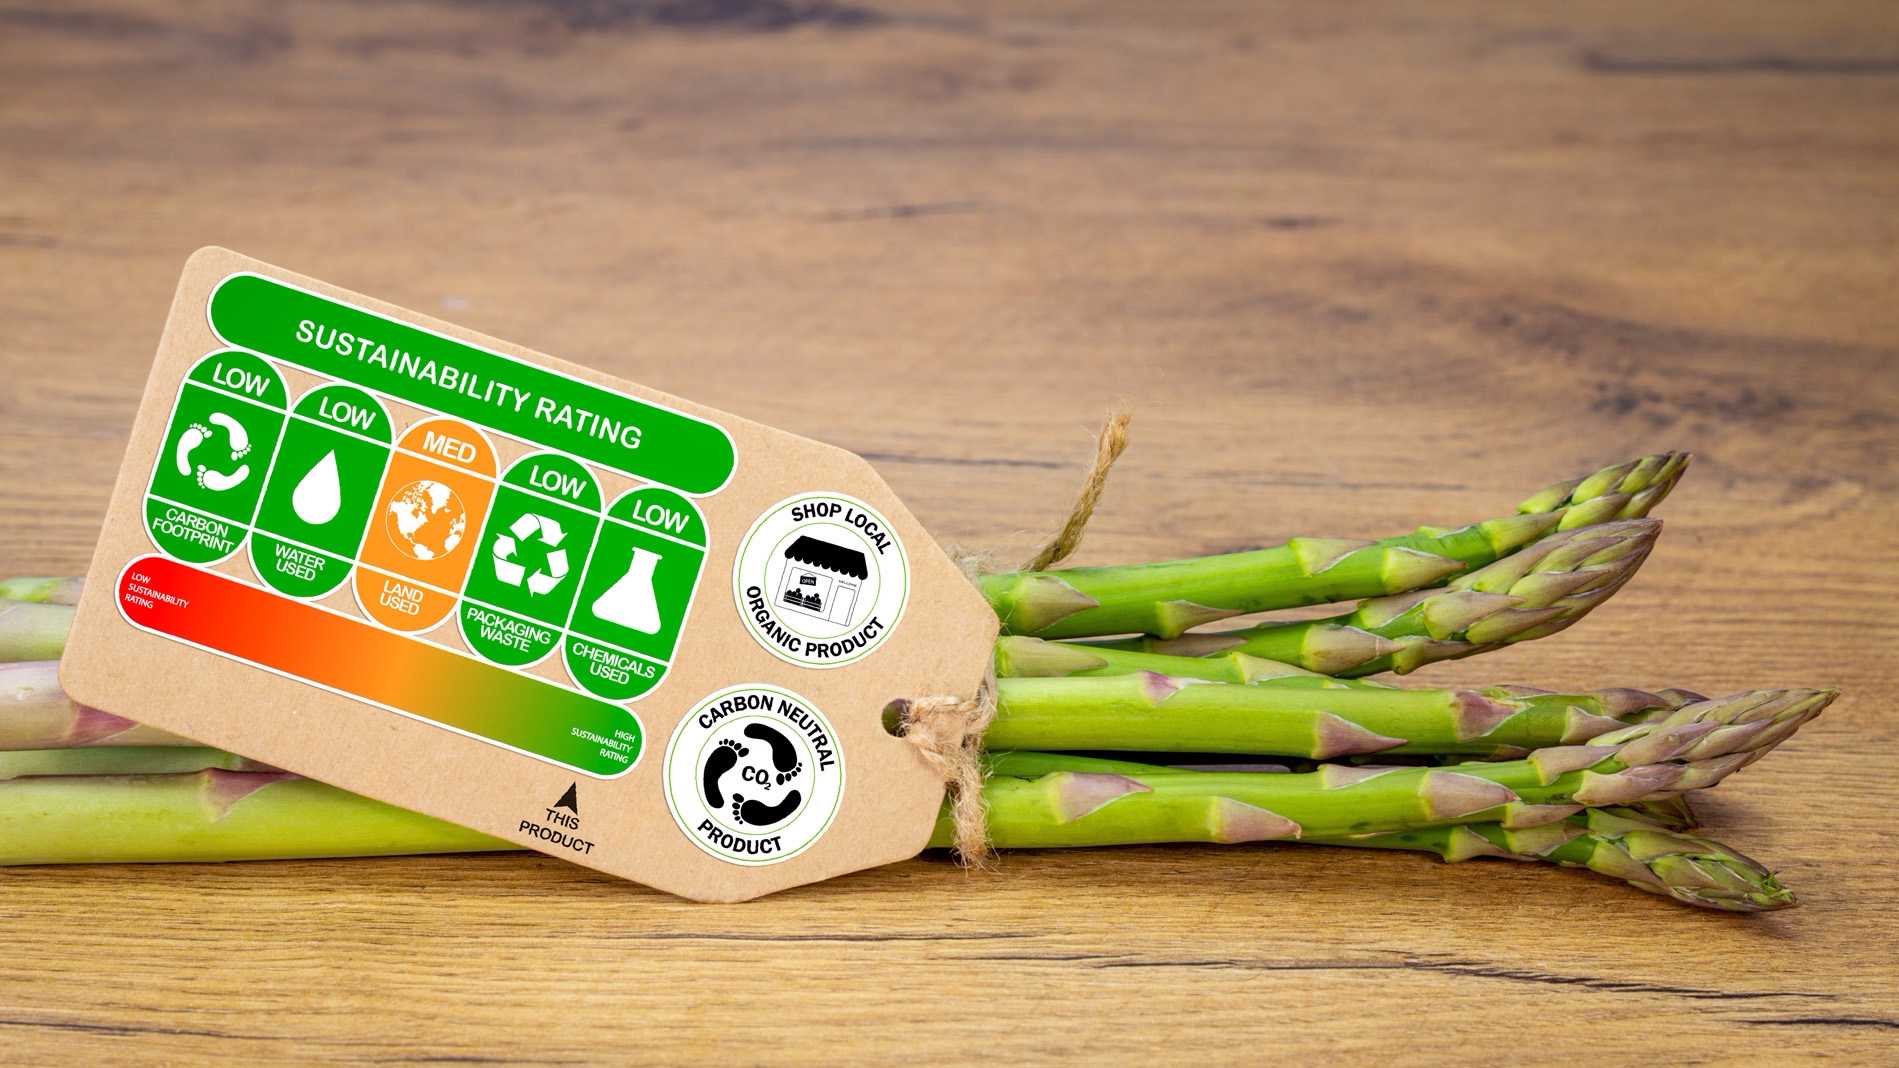 The picture shows asparagus with a label indicating how sustainably they are produced.